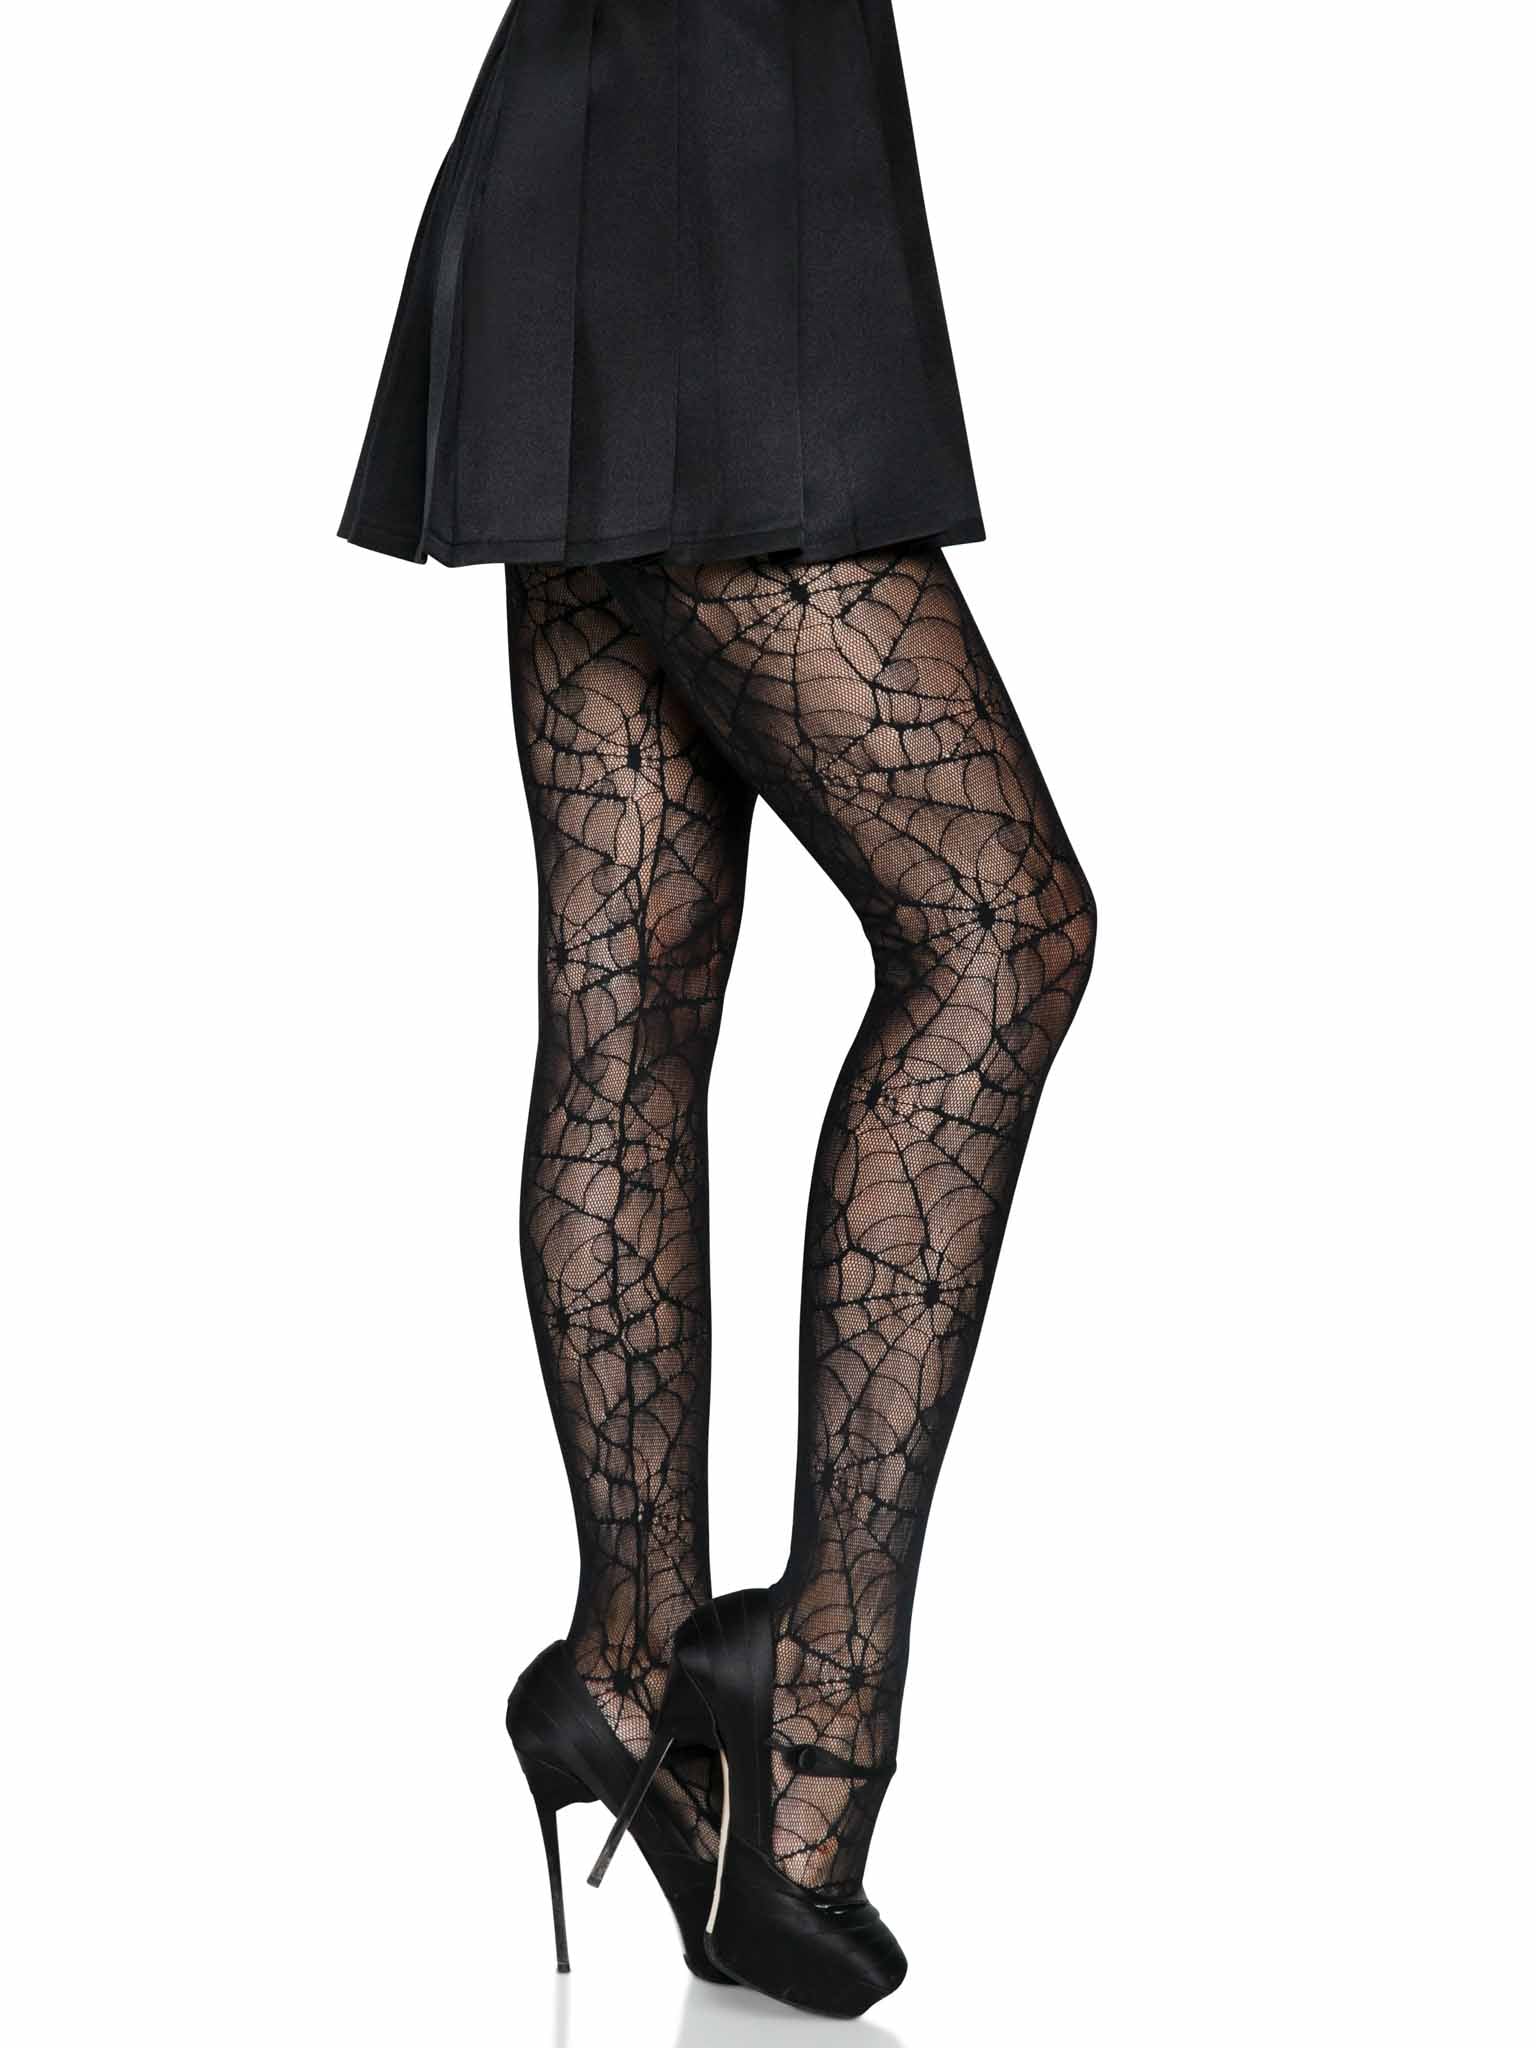 Spiderweb Lace Pantyhose  Pantyhose, Lace, Spider web